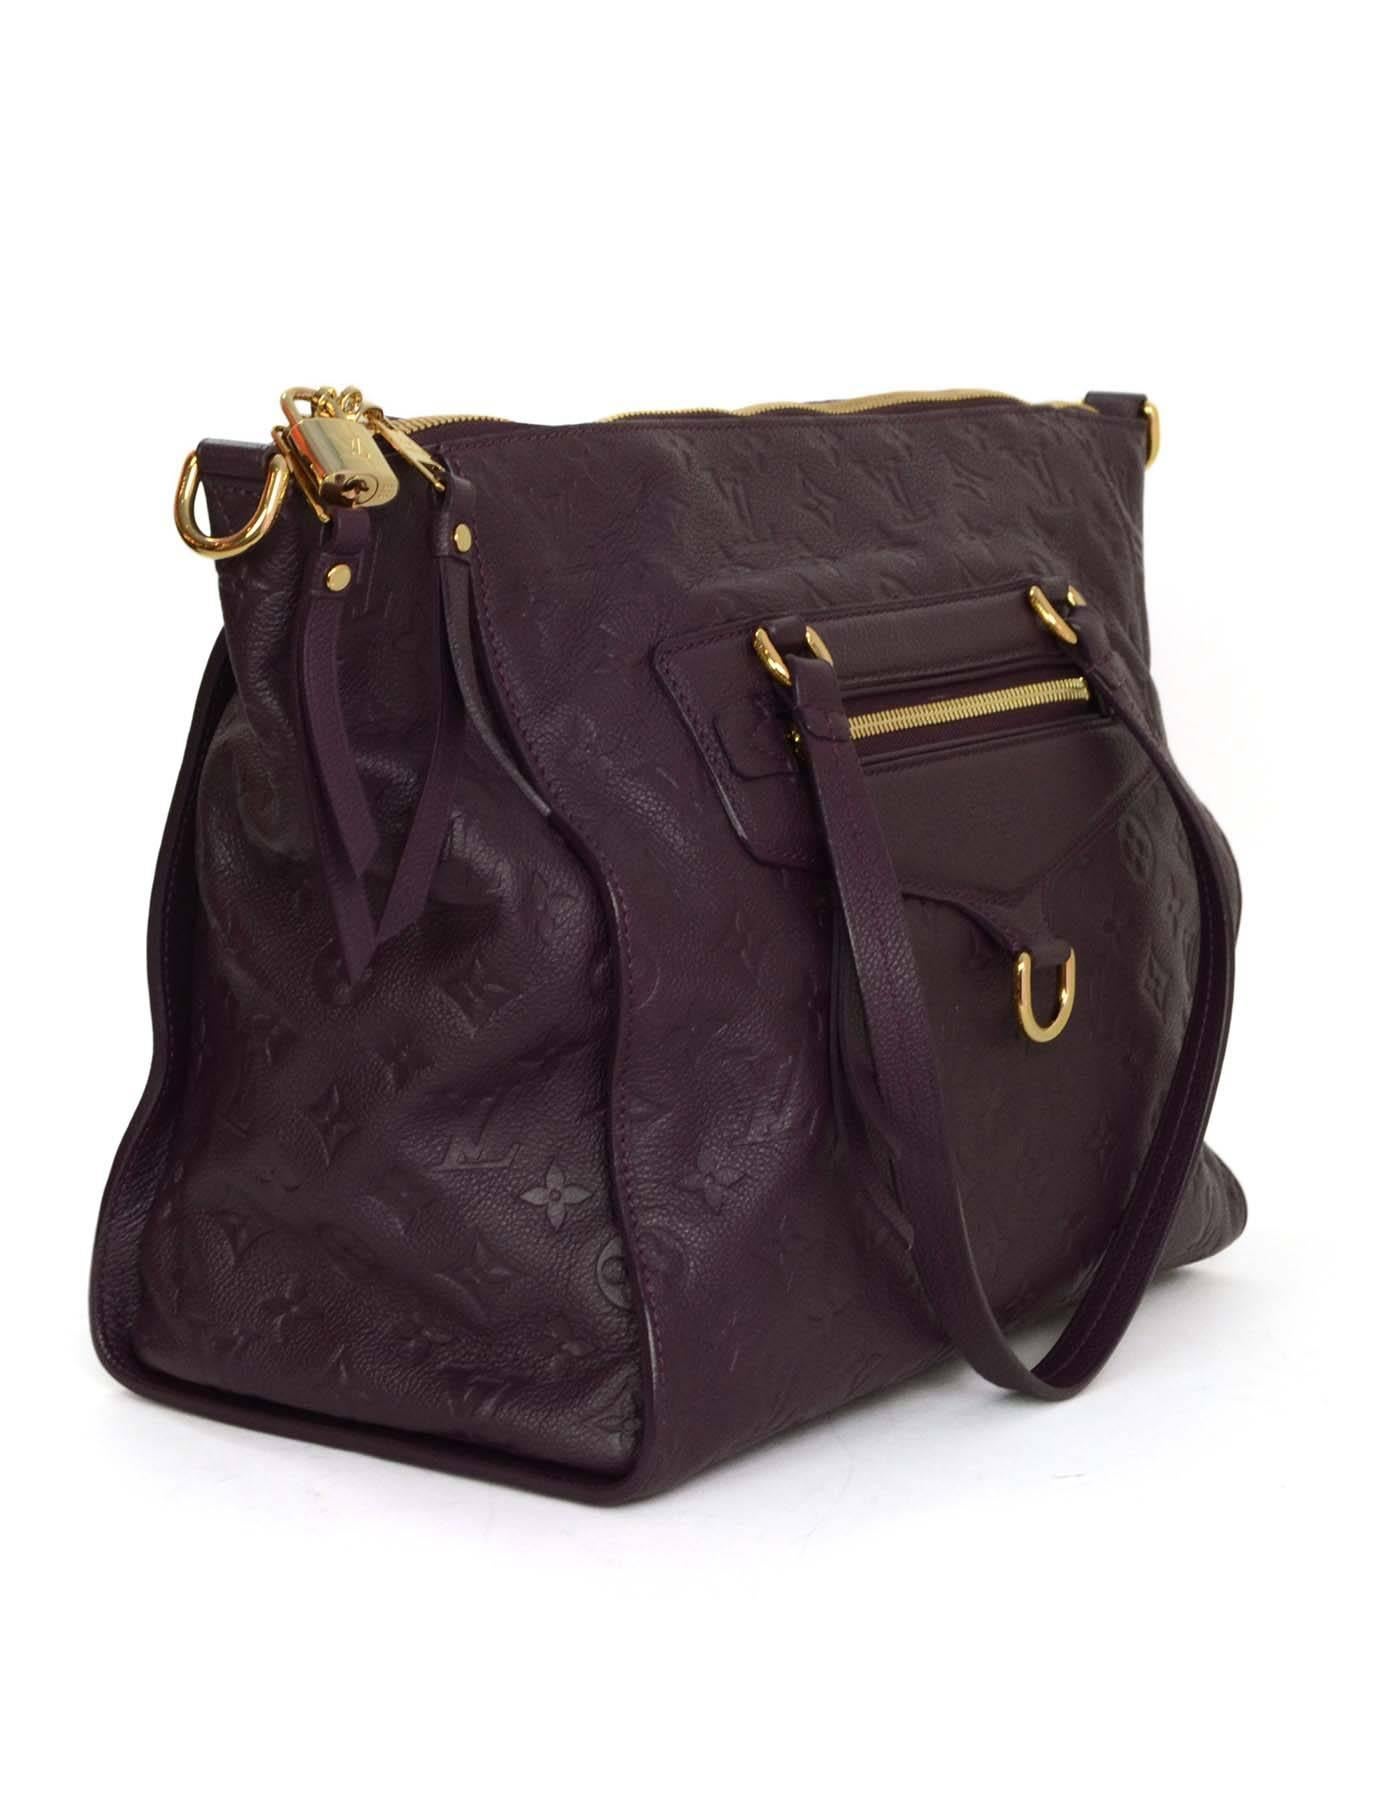 Louis Vuitton Aube Purple Monogram Empreinte Lumeniuse PM Tote 
Features optional shoulder/crossbody strap
Made In: France
Year of Production: 2011
Color: Aube purple
Hardware: Goldtone
Materials: Leather
Lining: Purple with black stripes